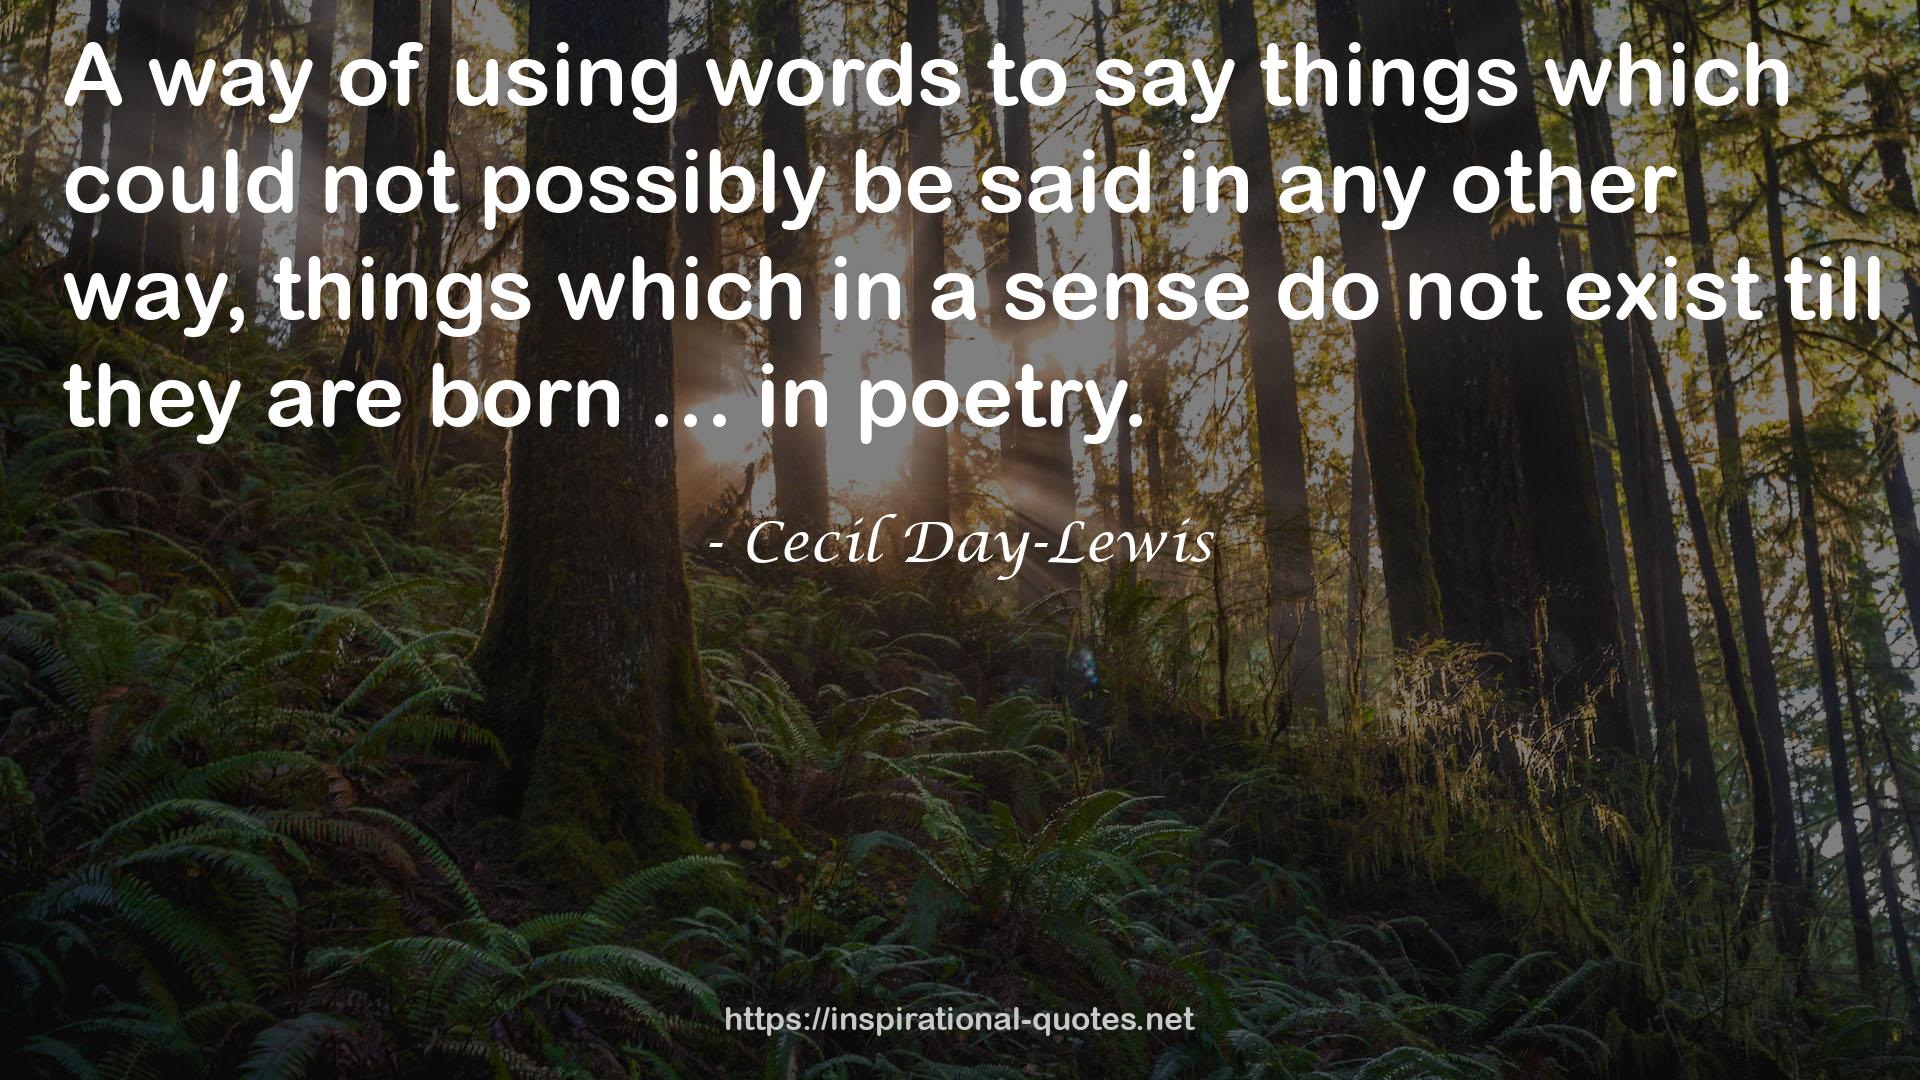 Cecil Day-Lewis QUOTES